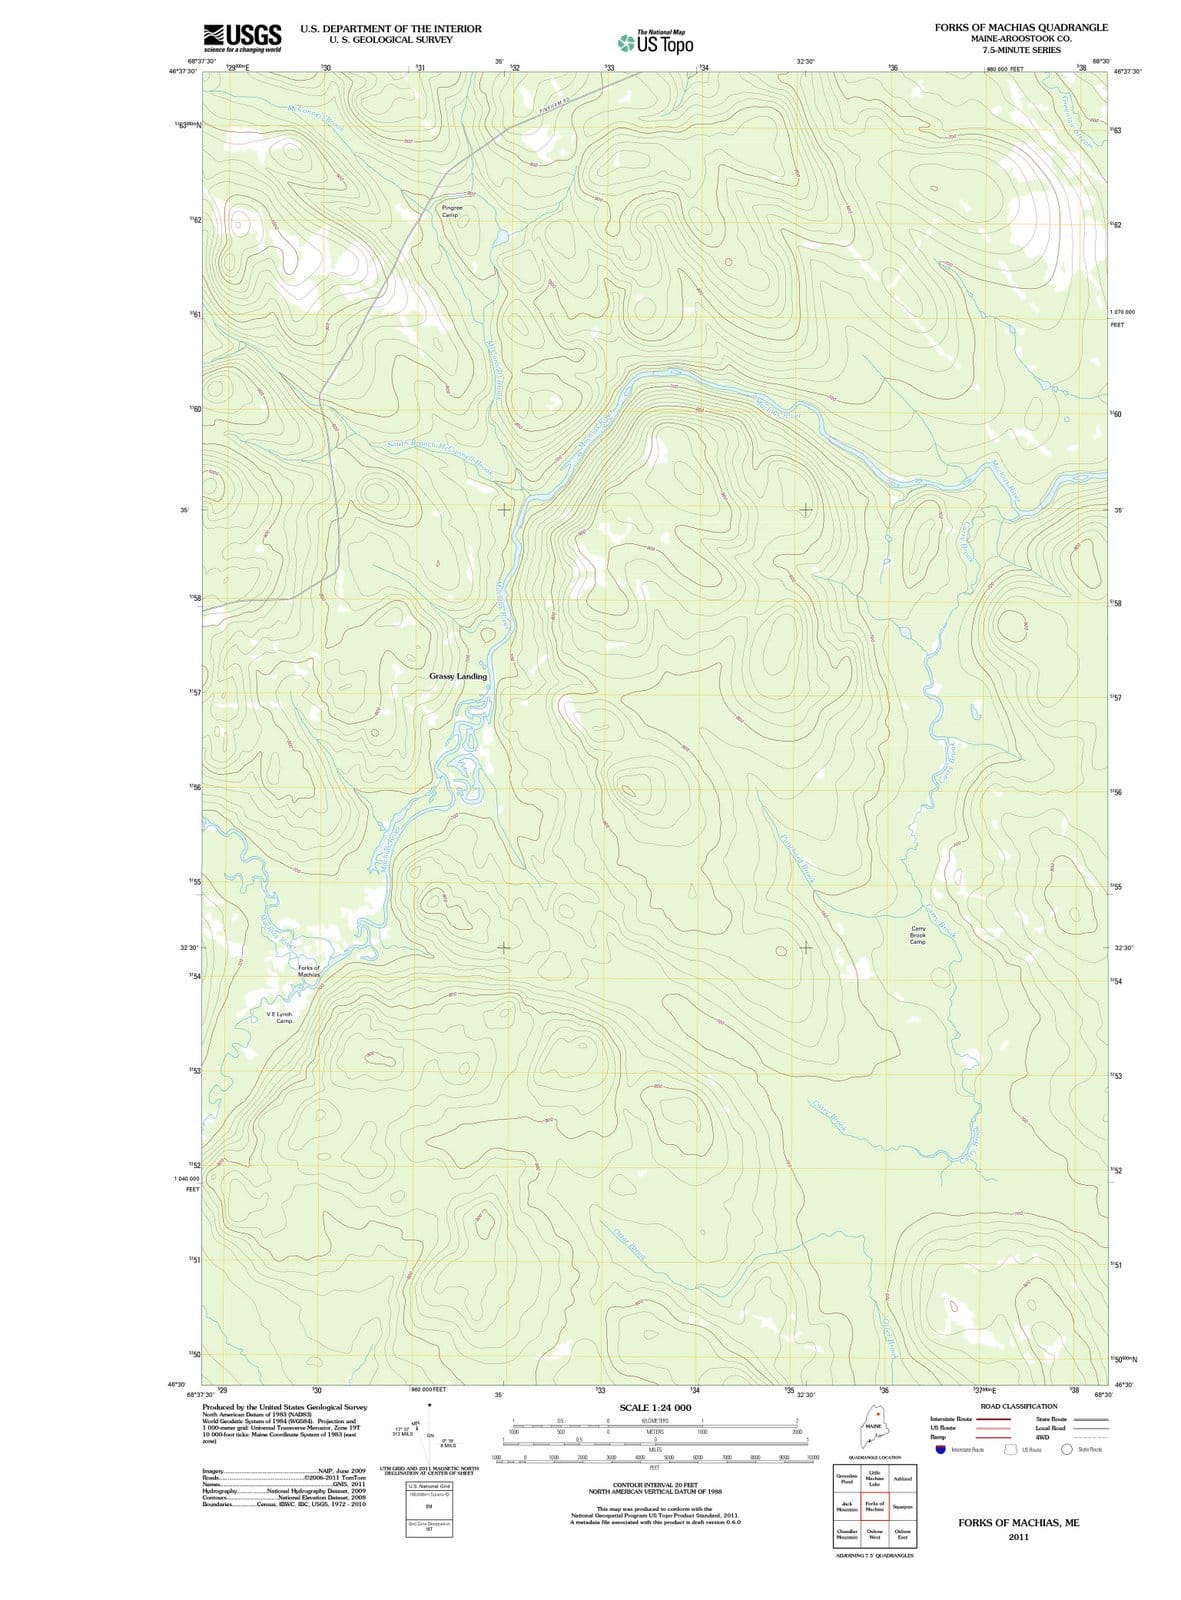 2011 Forks of Machias, ME - Maine - USGS Topographic Map